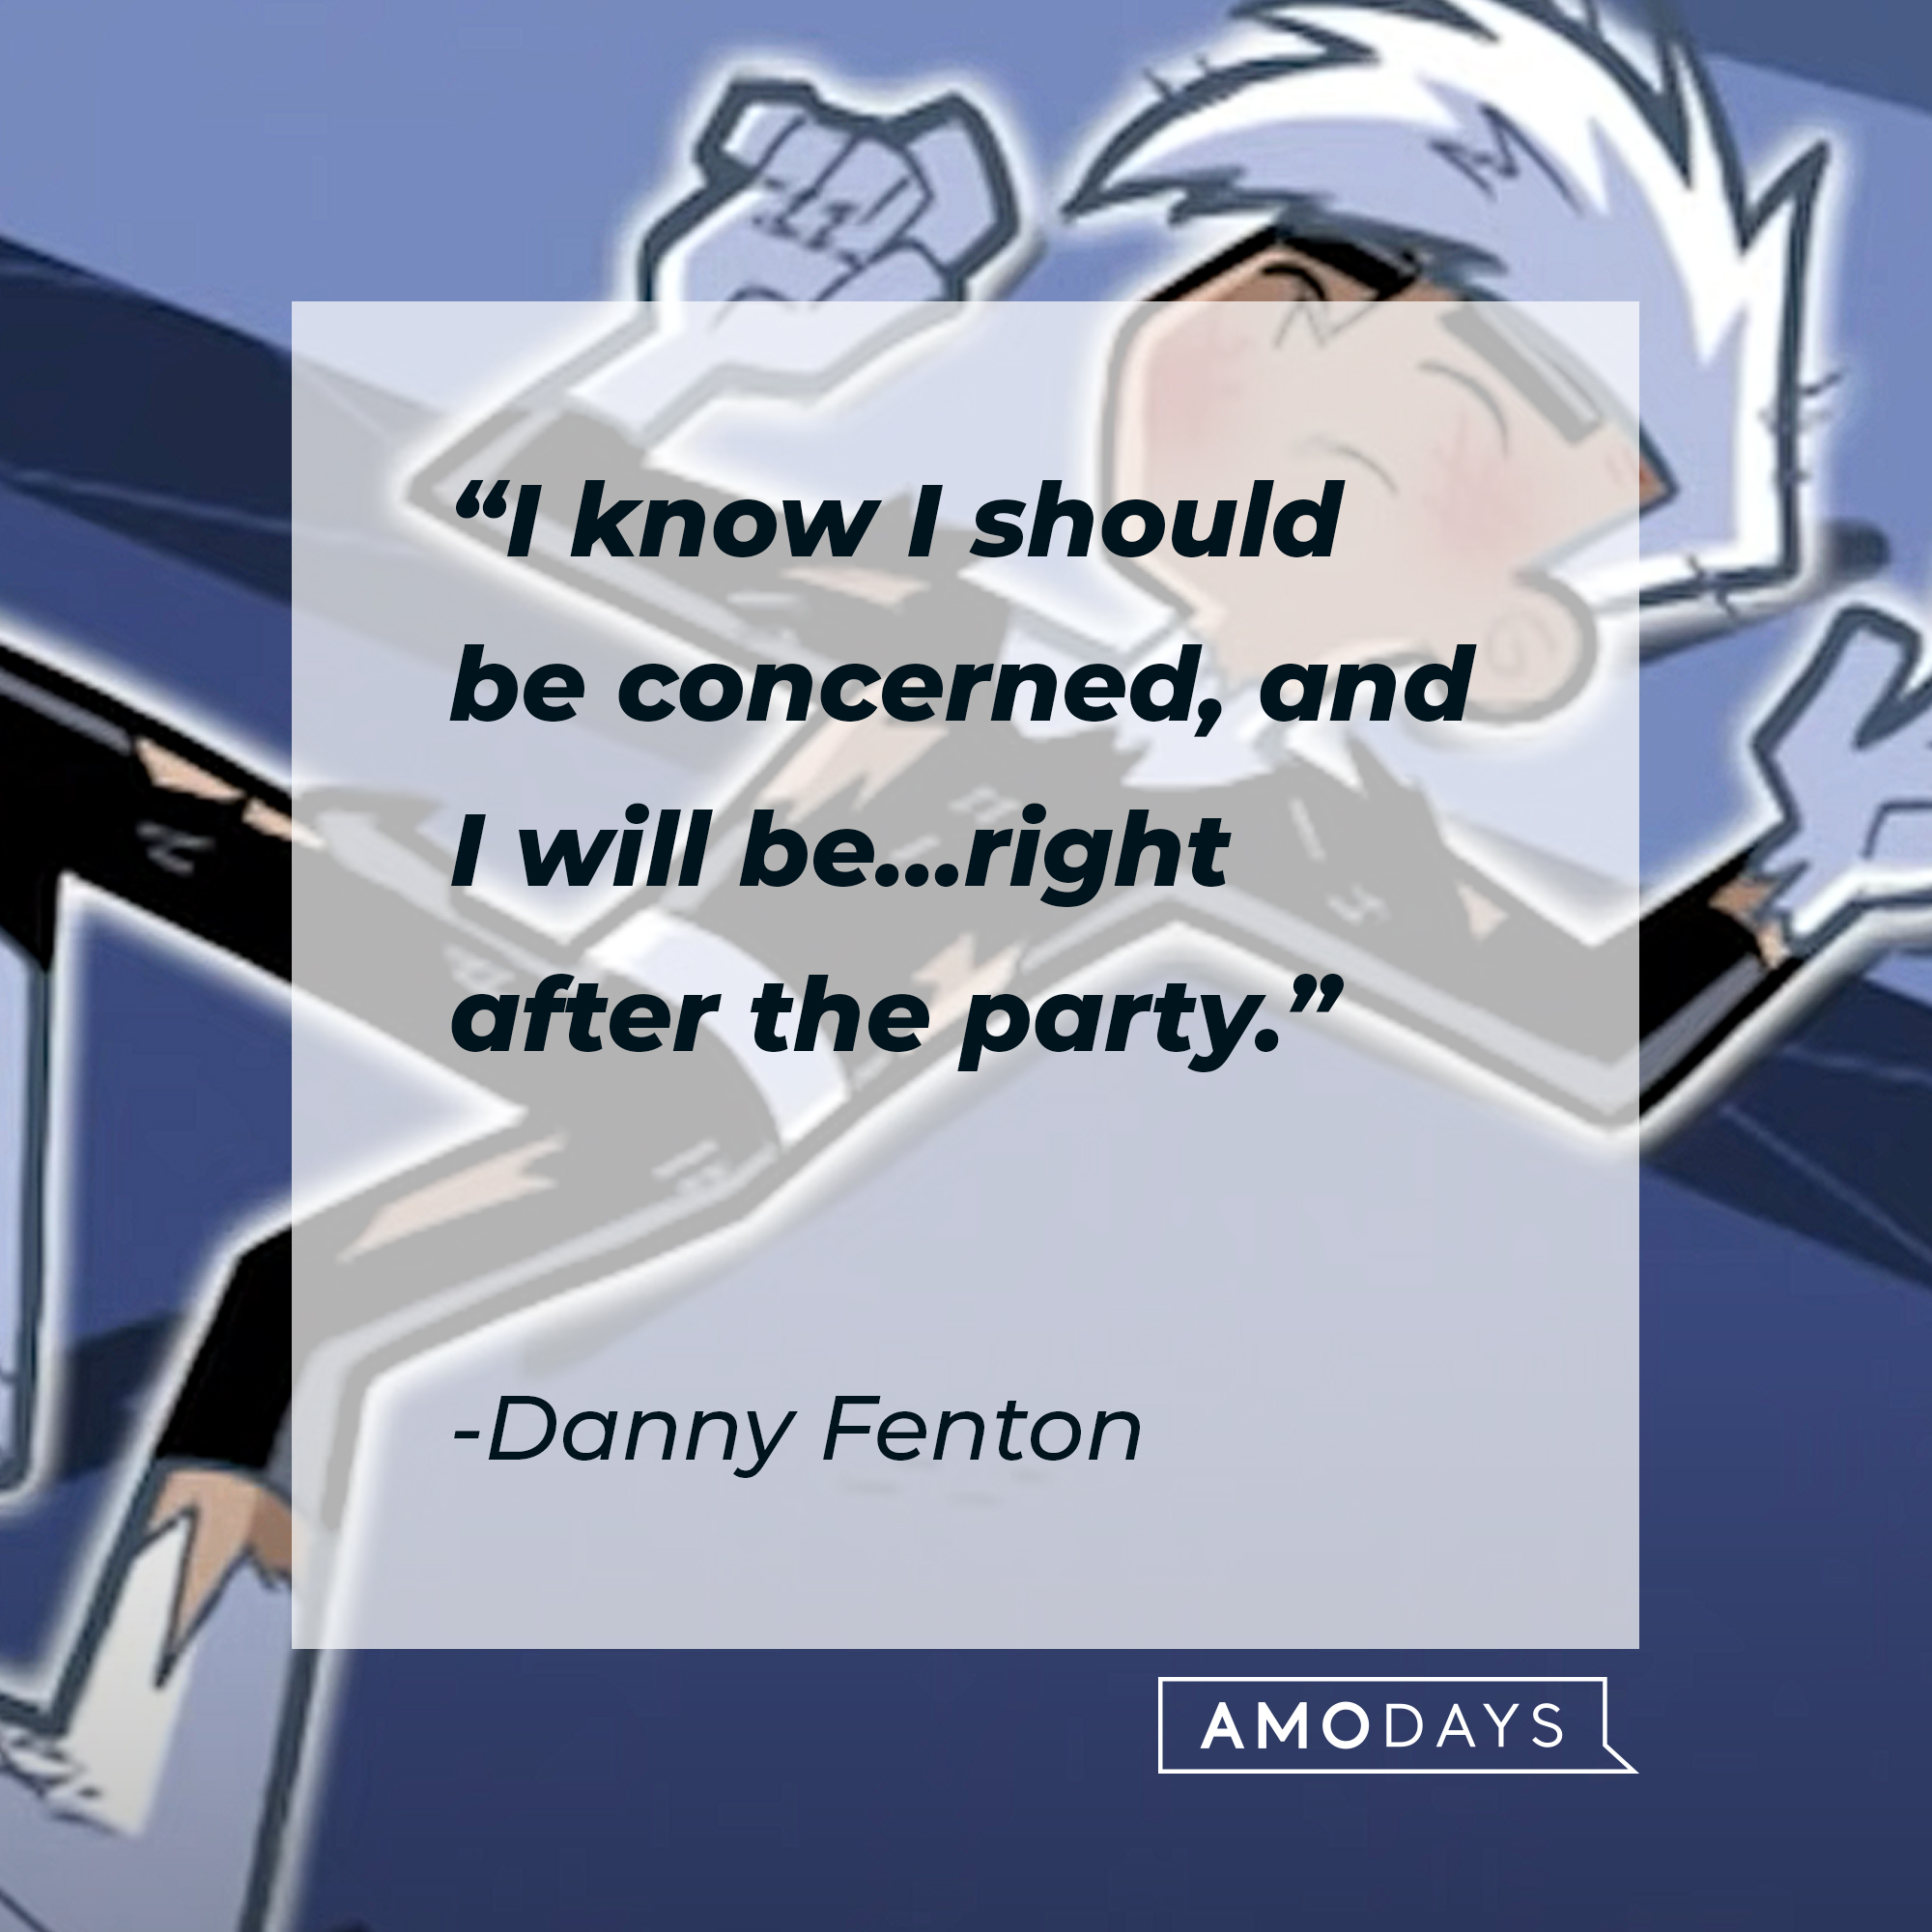 An image of Danny Phantom with Danny Fenton’s quote: “I know I should be concerned, and I will be…right after the party." | Source: youtube.com/nickrewind